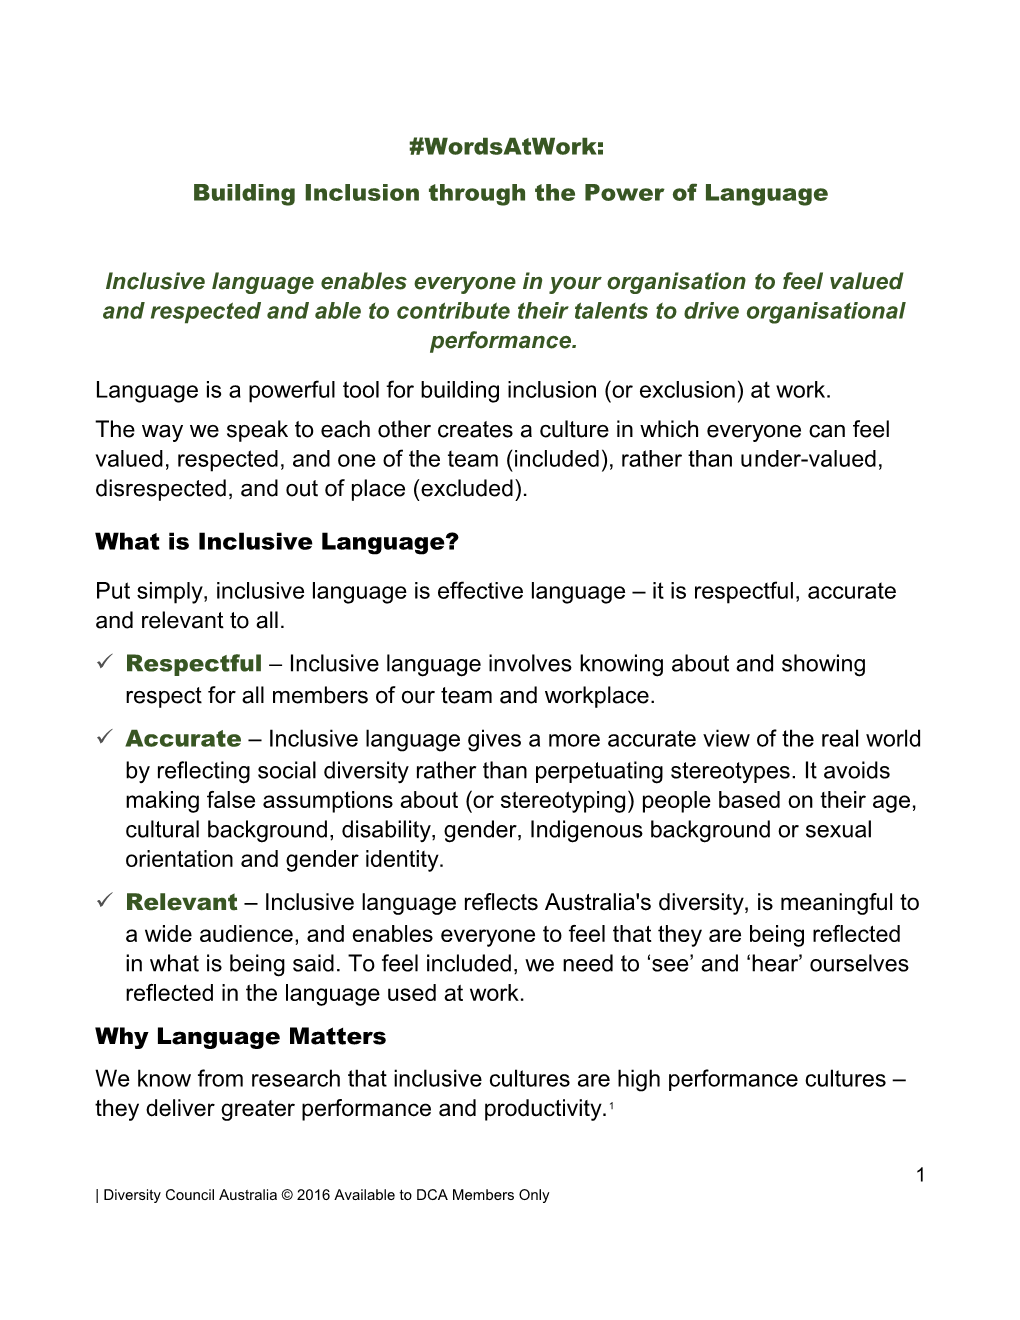 Building Inclusion Through the Power of Language